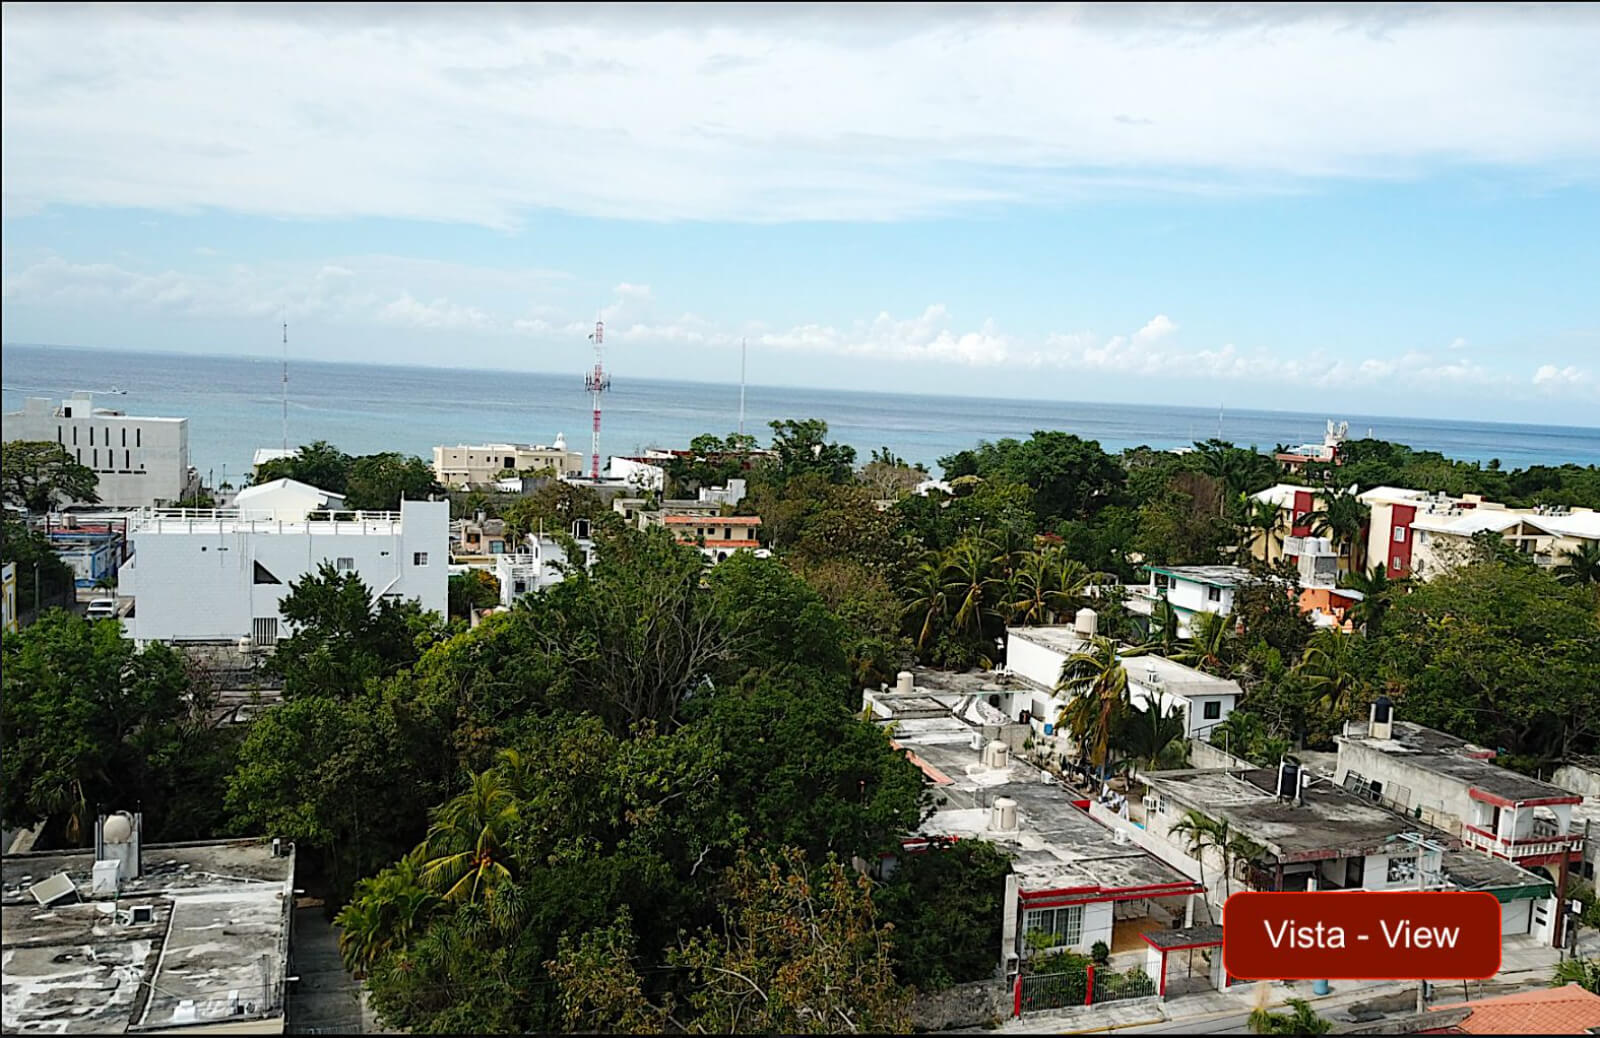 Apartment with pool, jacuzzi, grill, paddle tennis, bar, for sale, Cozumel